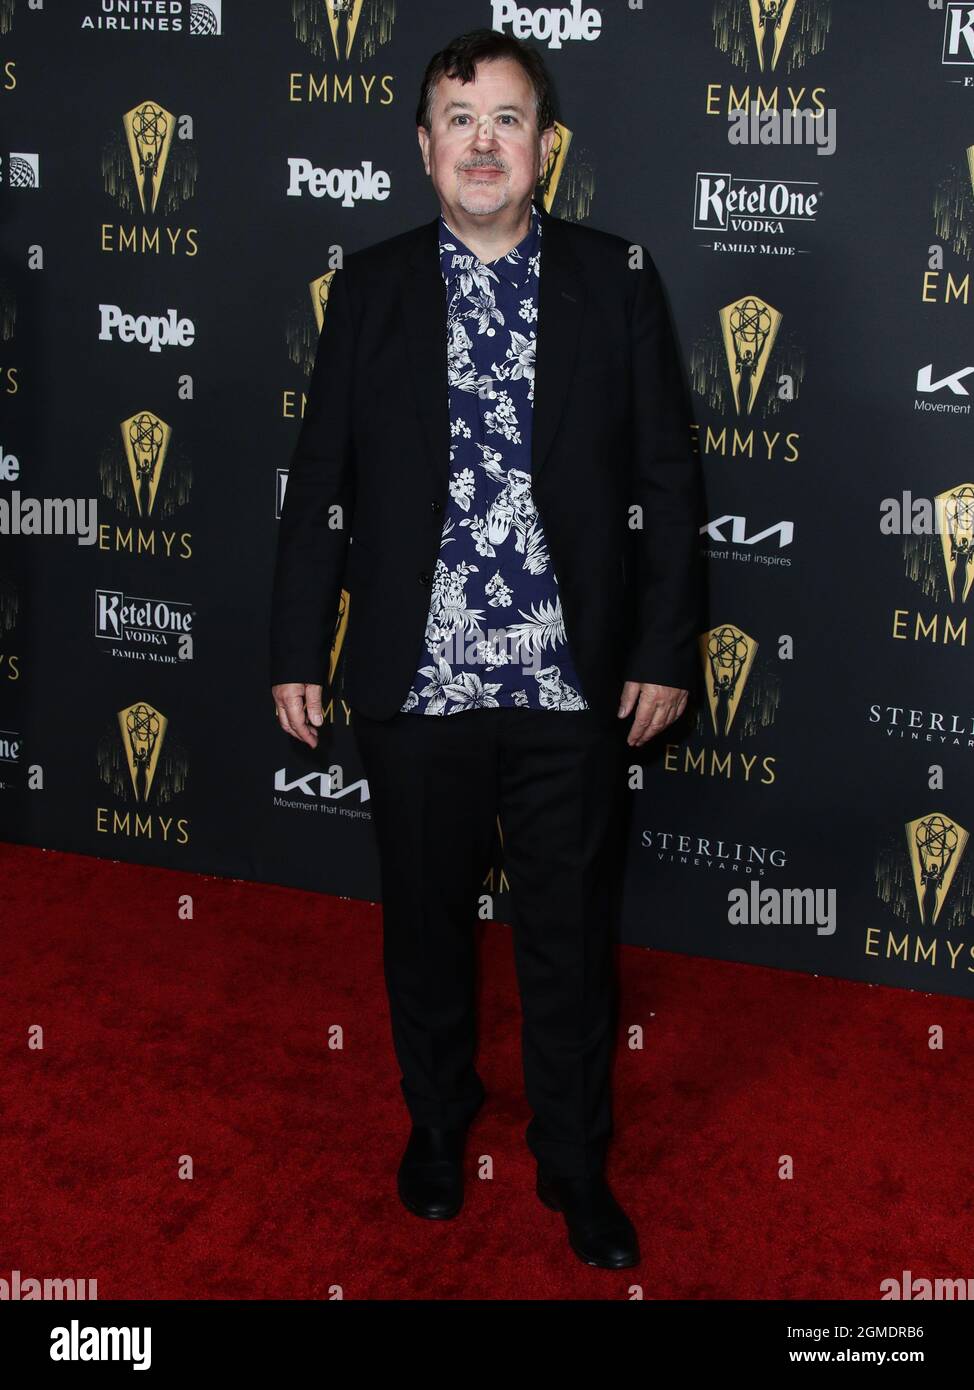 North Hollywood, USA. 17th Sep, 2021. NORTH HOLLYWOOD, LOS ANGELES, CALIFORNIA, USA - SEPTEMBER 17: Actor Jeremy Swift arrives at the Television Academy's Reception To Honor 73rd Emmy Award Nominees held at The Academy of Television Arts and Sciences on September 17, 2021 in North Hollywood, Los Angeles, California, USA. (Photo by Xavier Collin/Image Press Agency/Sipa USA) Credit: Sipa USA/Alamy Live News Stock Photo